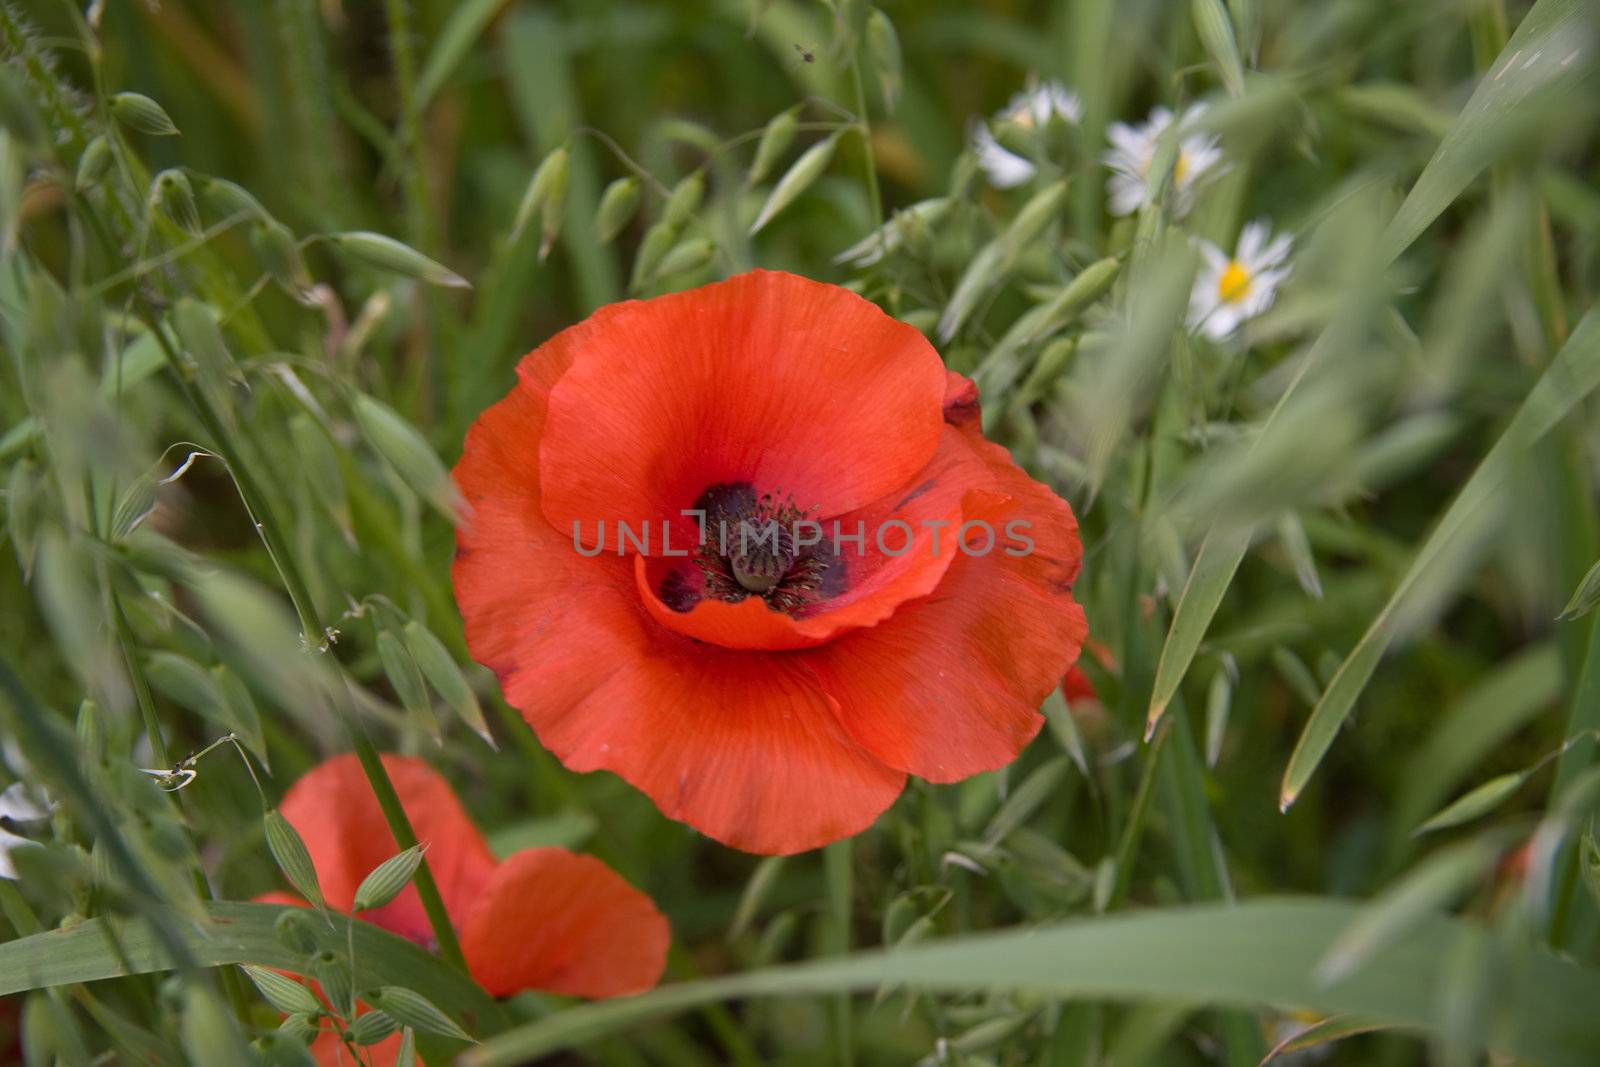 Beautiful poppy in amongst the grass and wildflowers.